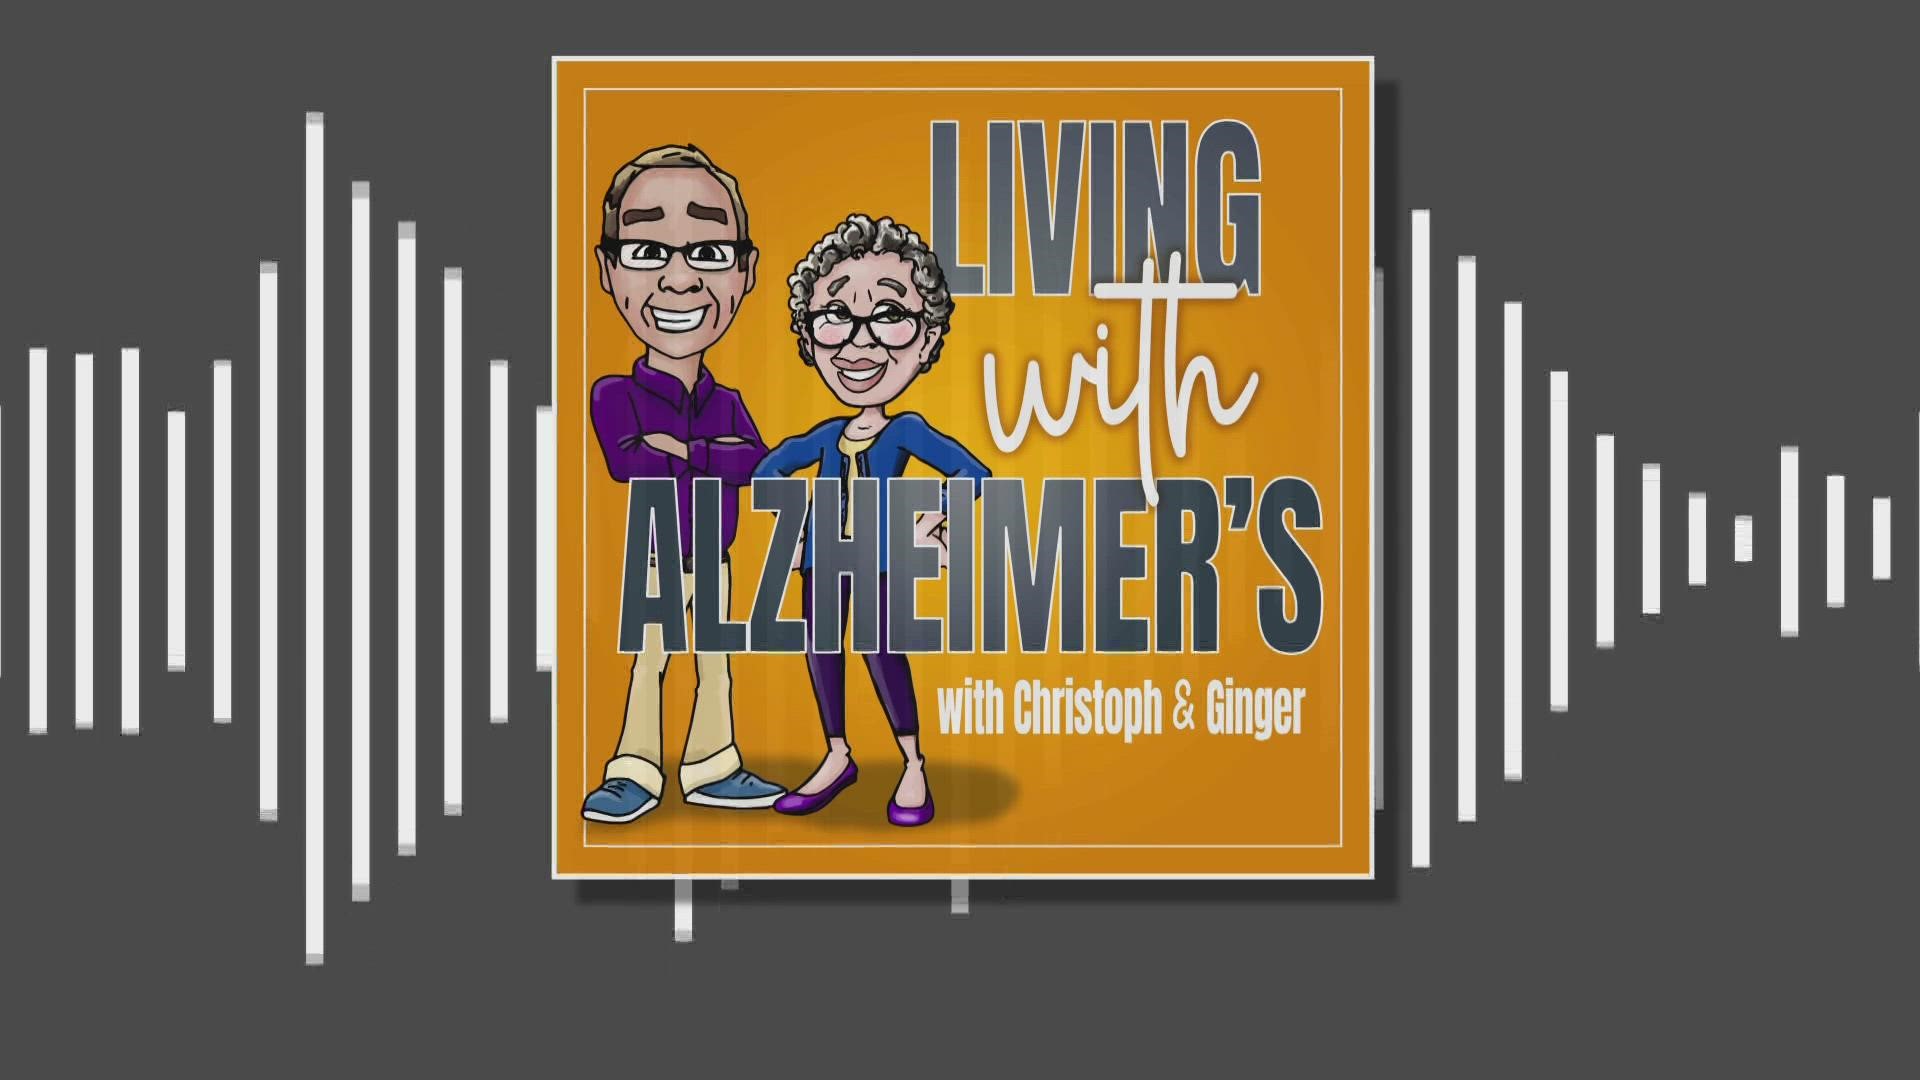 The 'Living with Alzheimer's' podcast with Christoph and Ginger has a little bit of everything.